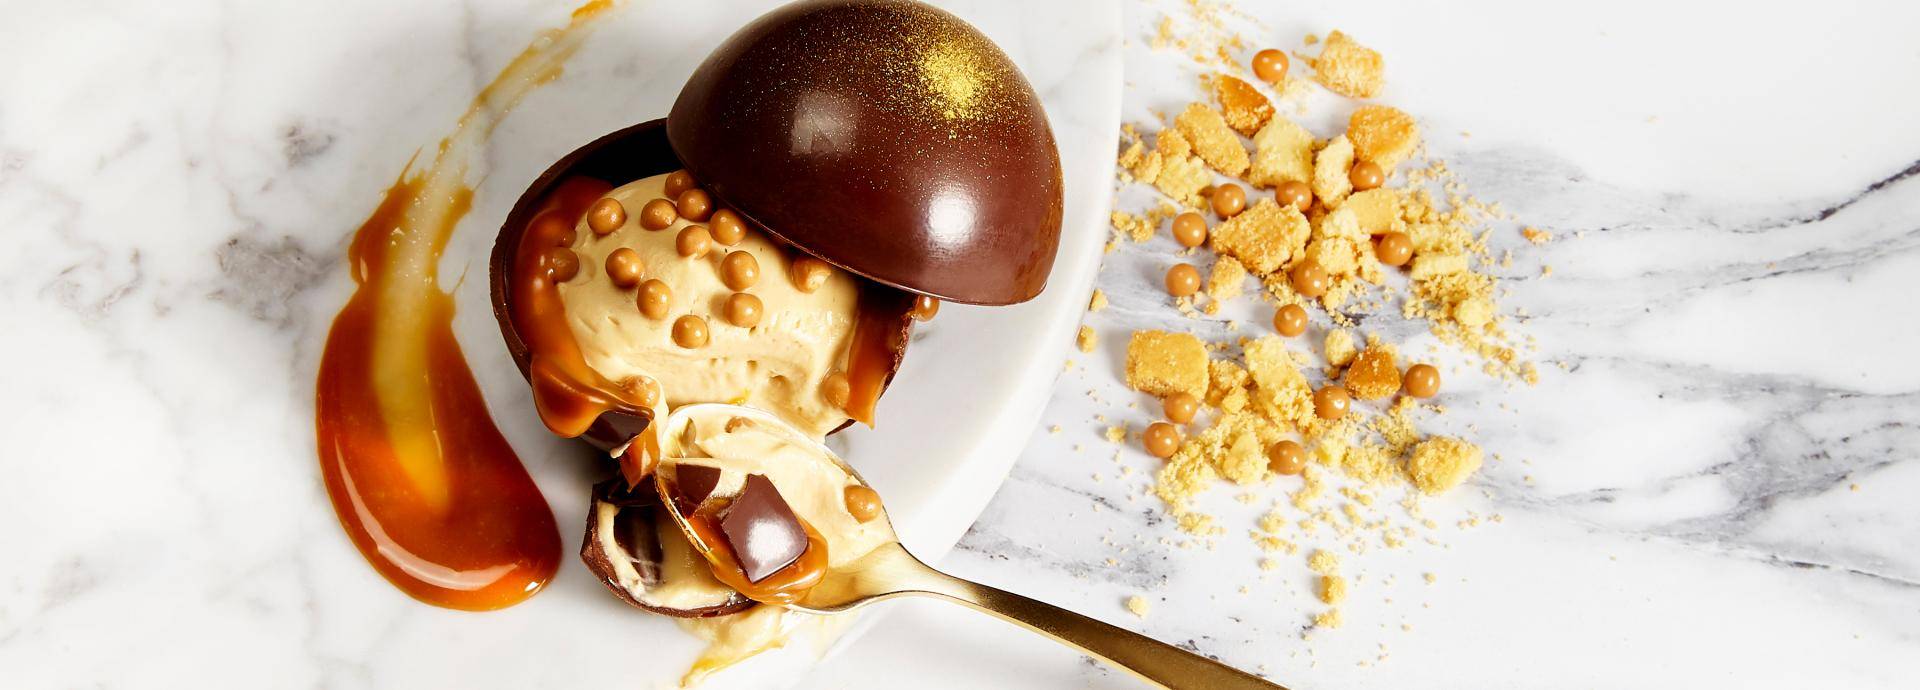 Chocolate Dome with Gold Ganache & Crispy Caramel download